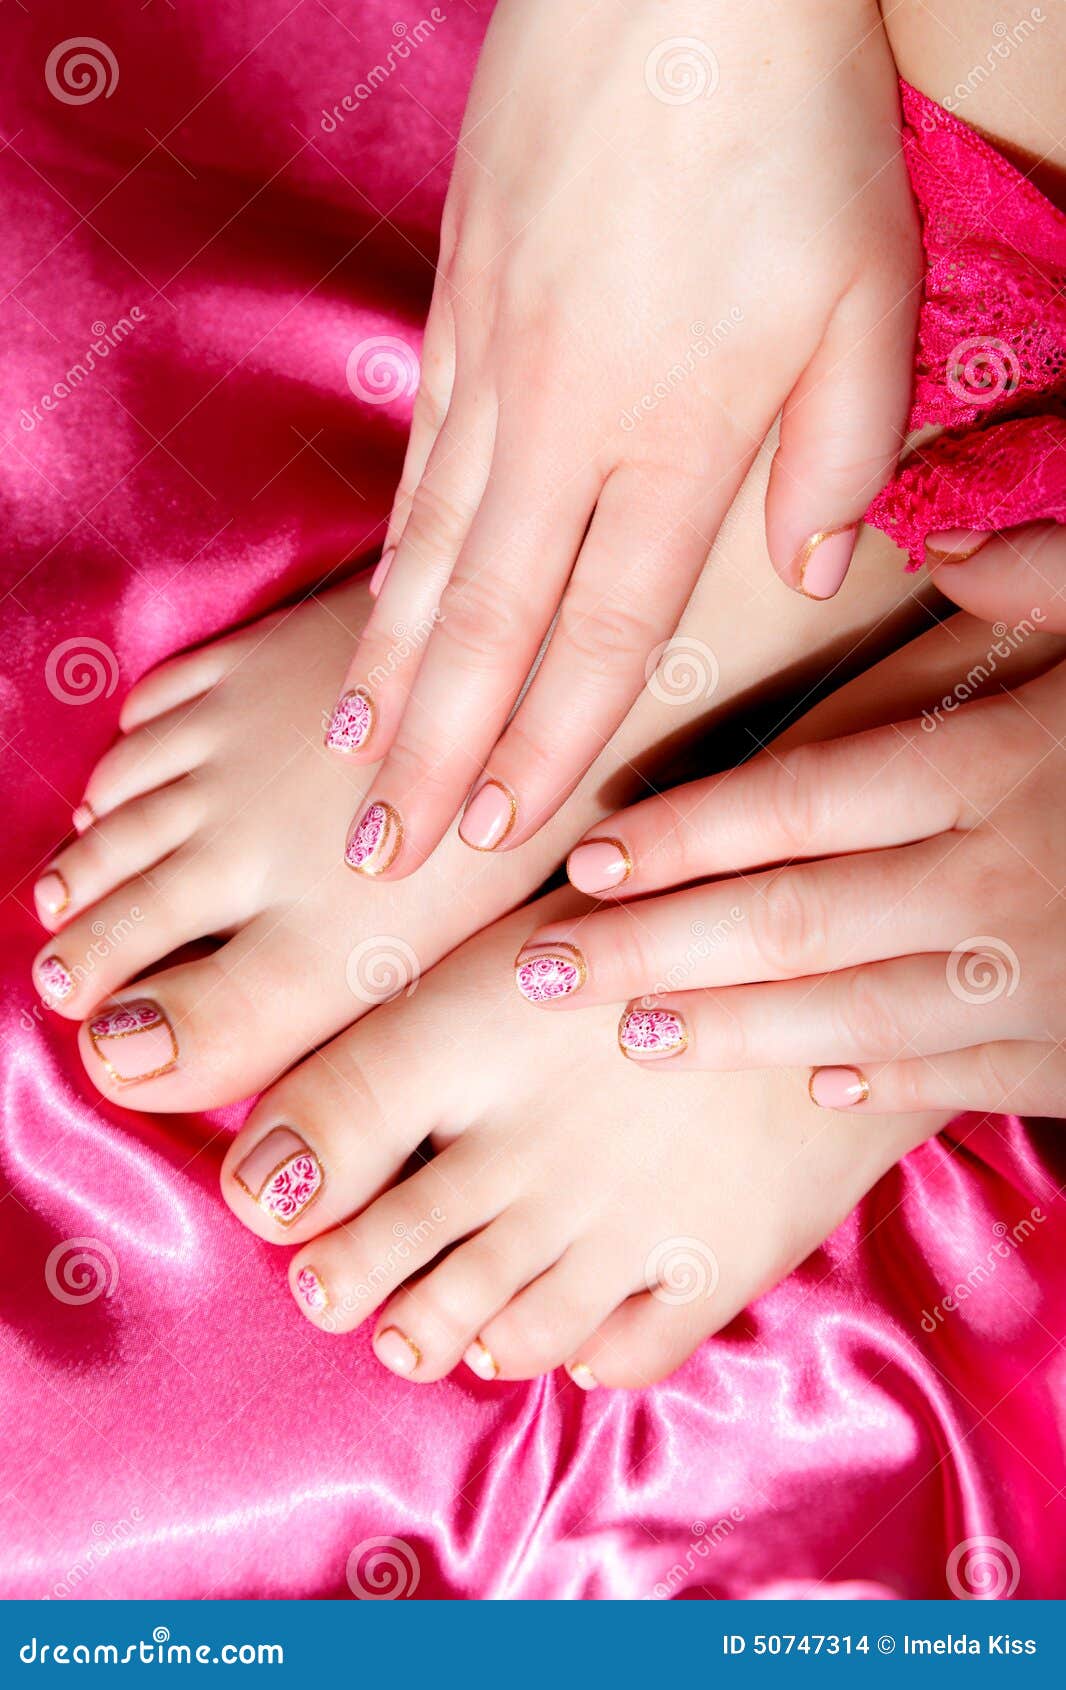 101600 Polished Nail Stock Photos Pictures  RoyaltyFree Images  iStock